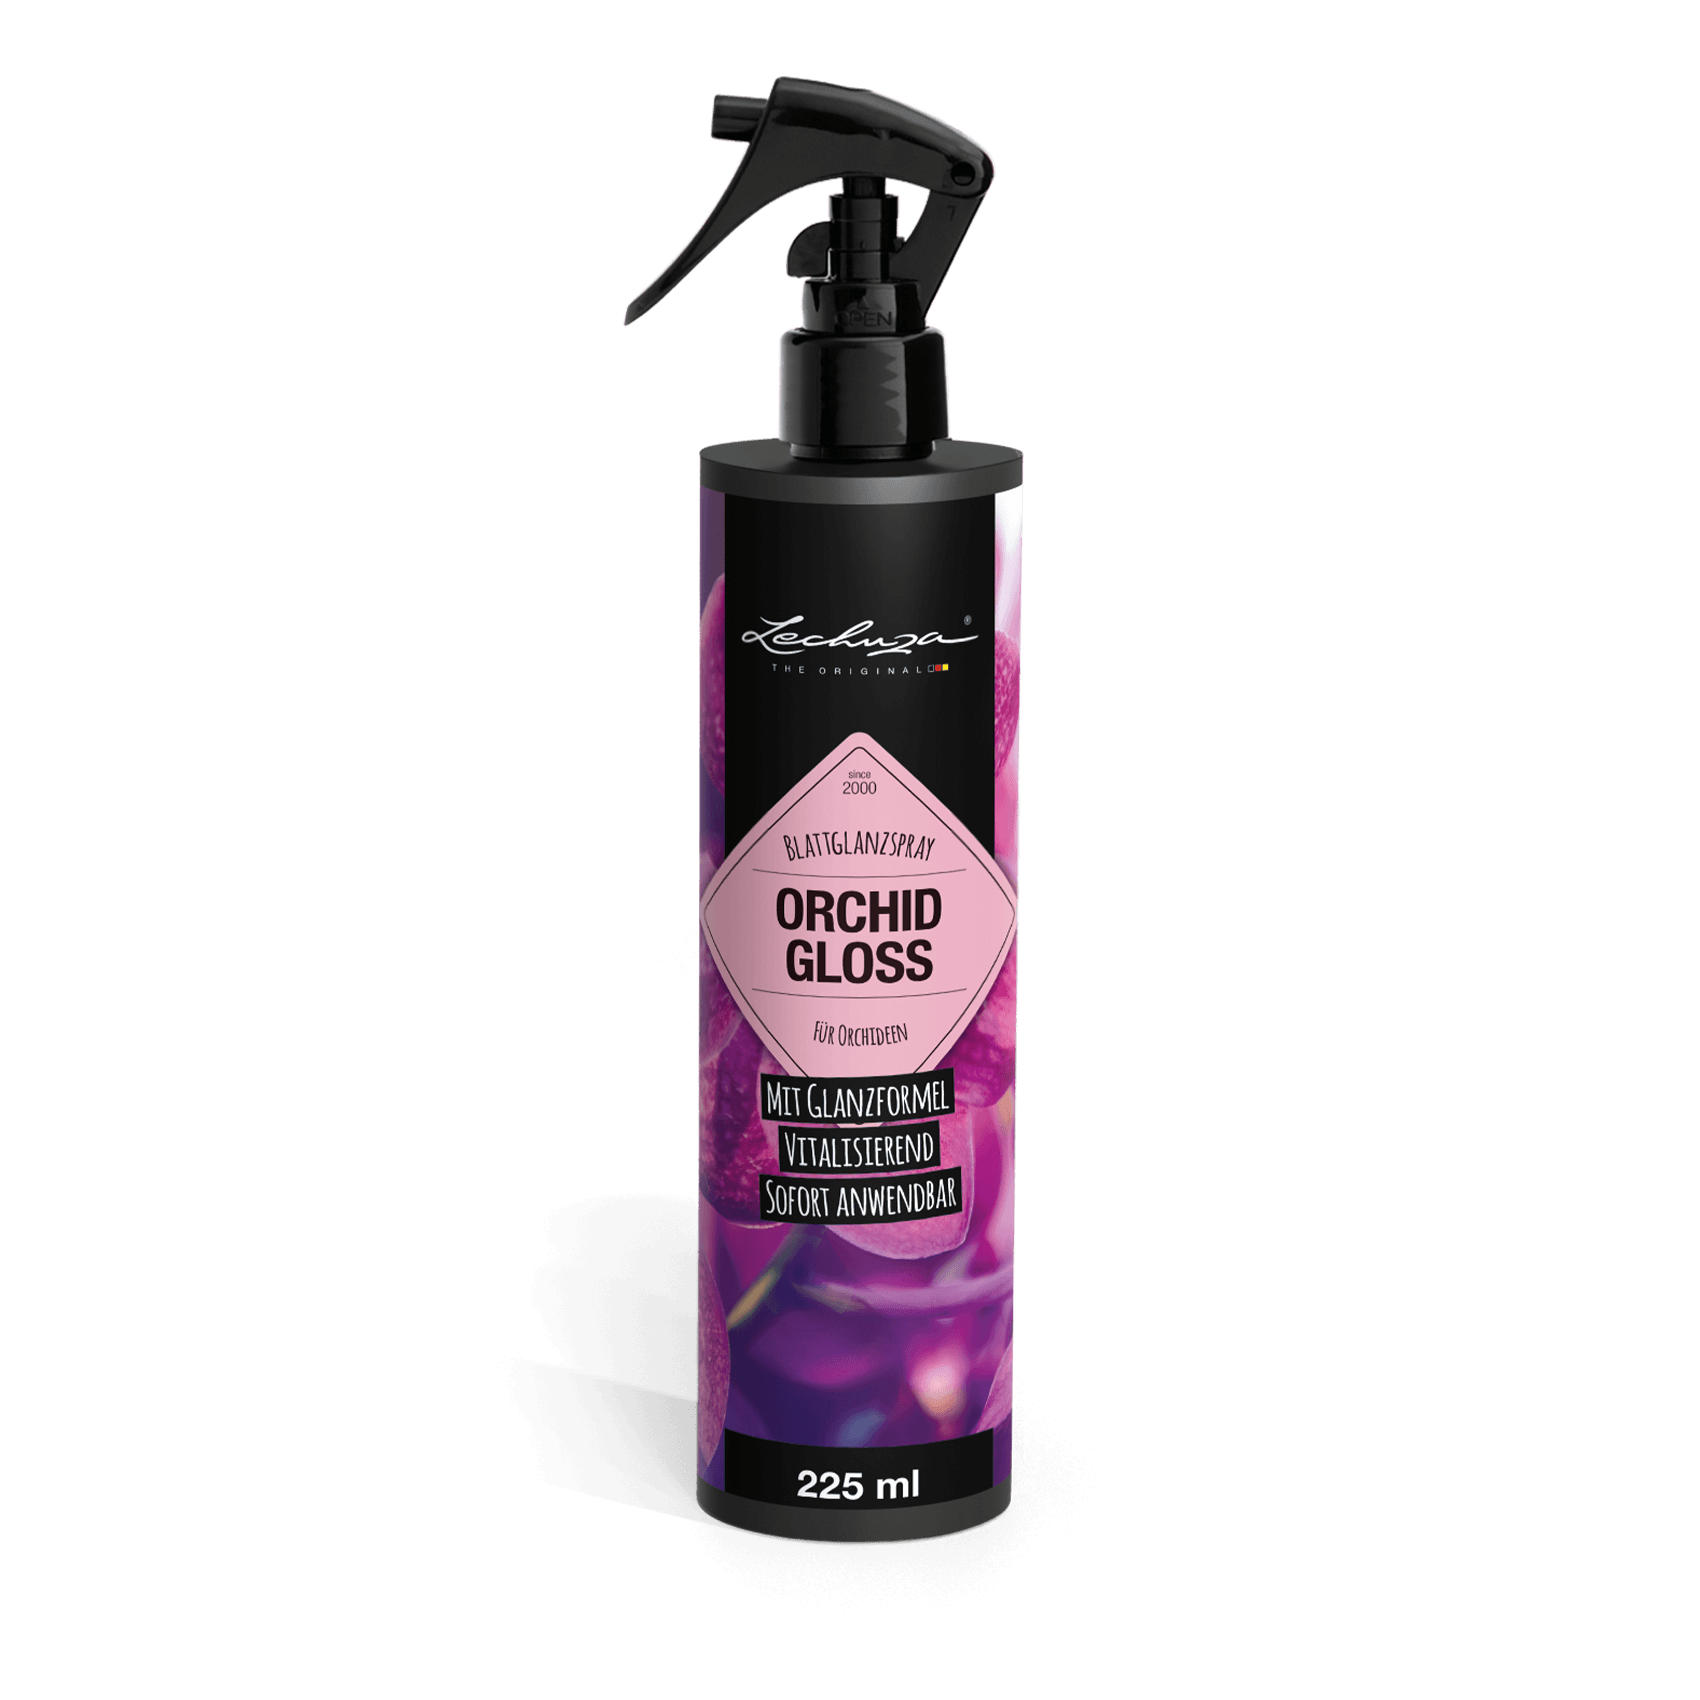 Orchid Gloss - leaf gloss spray for orchids